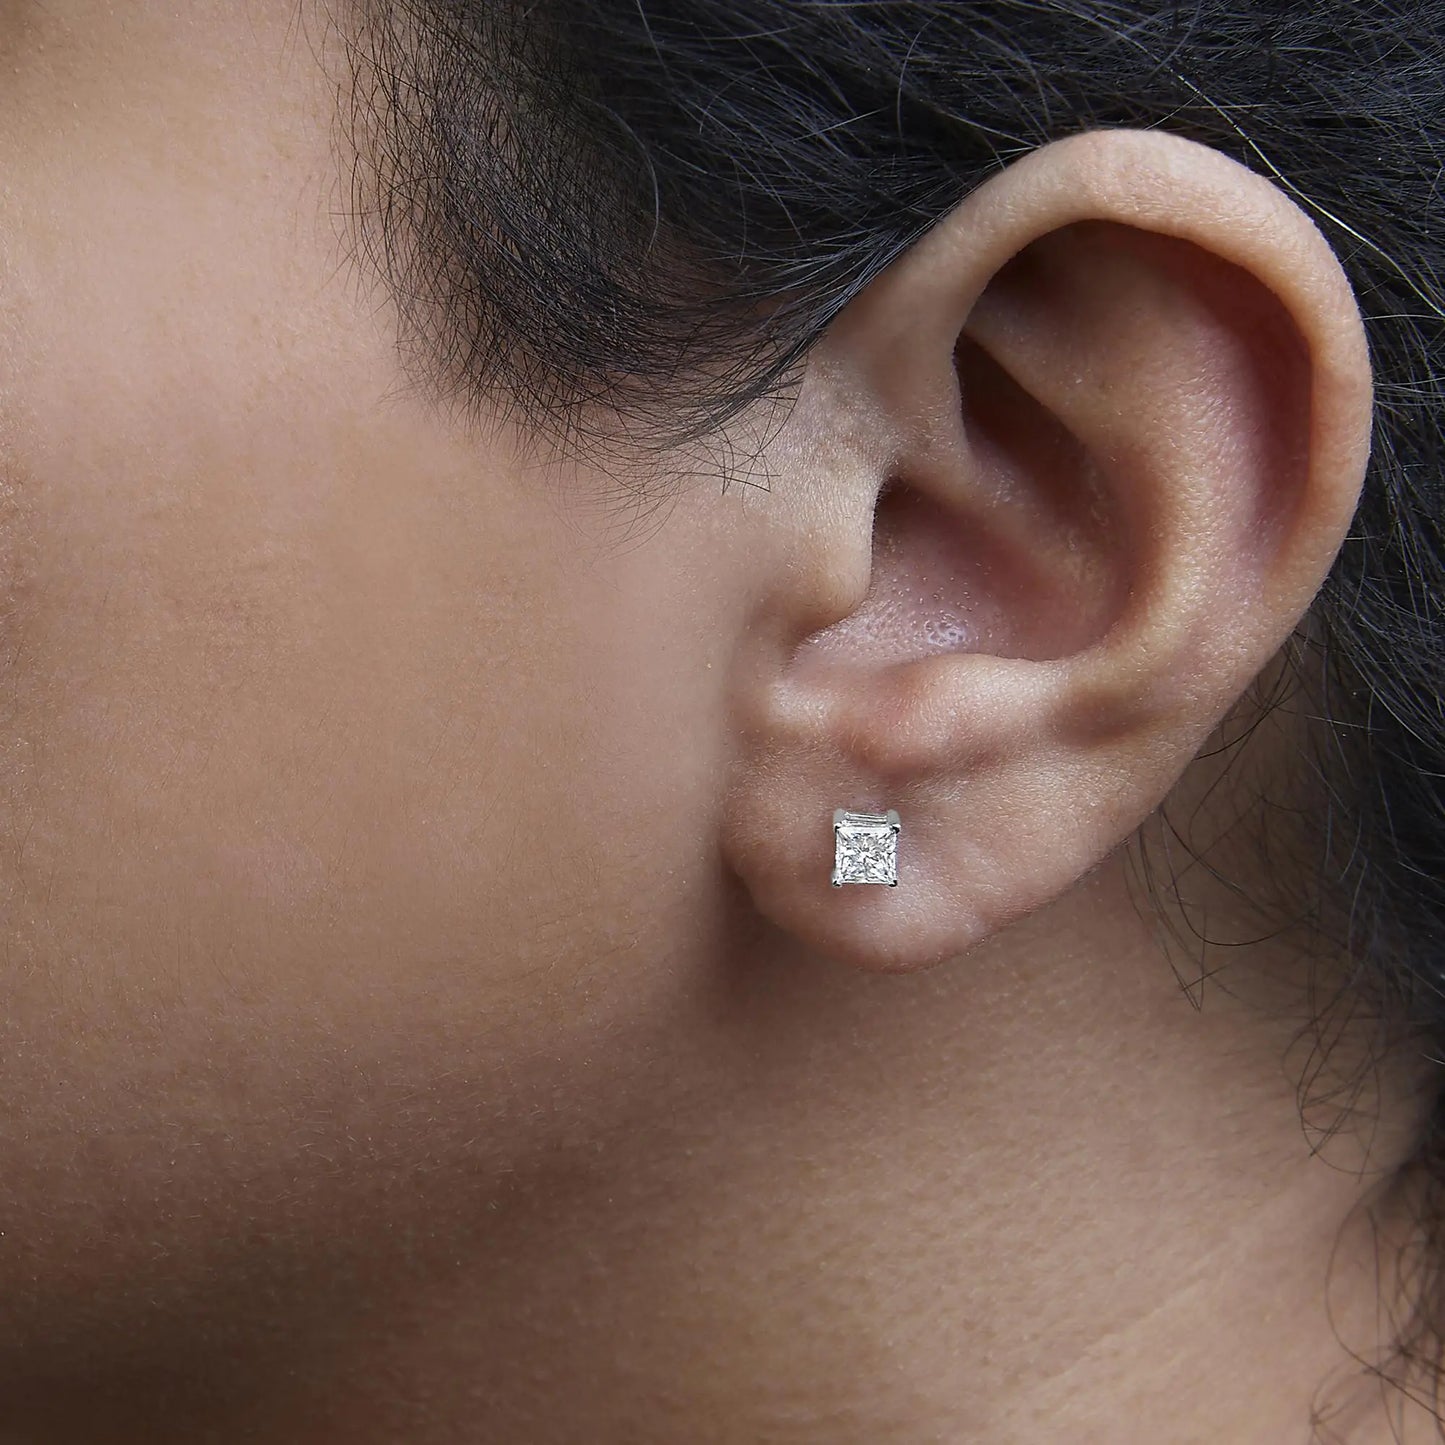 Stud earrings in 14 Carat white gold with Princess diamonds grown in the laboratory (color F-G, transparency VS2-SI1)